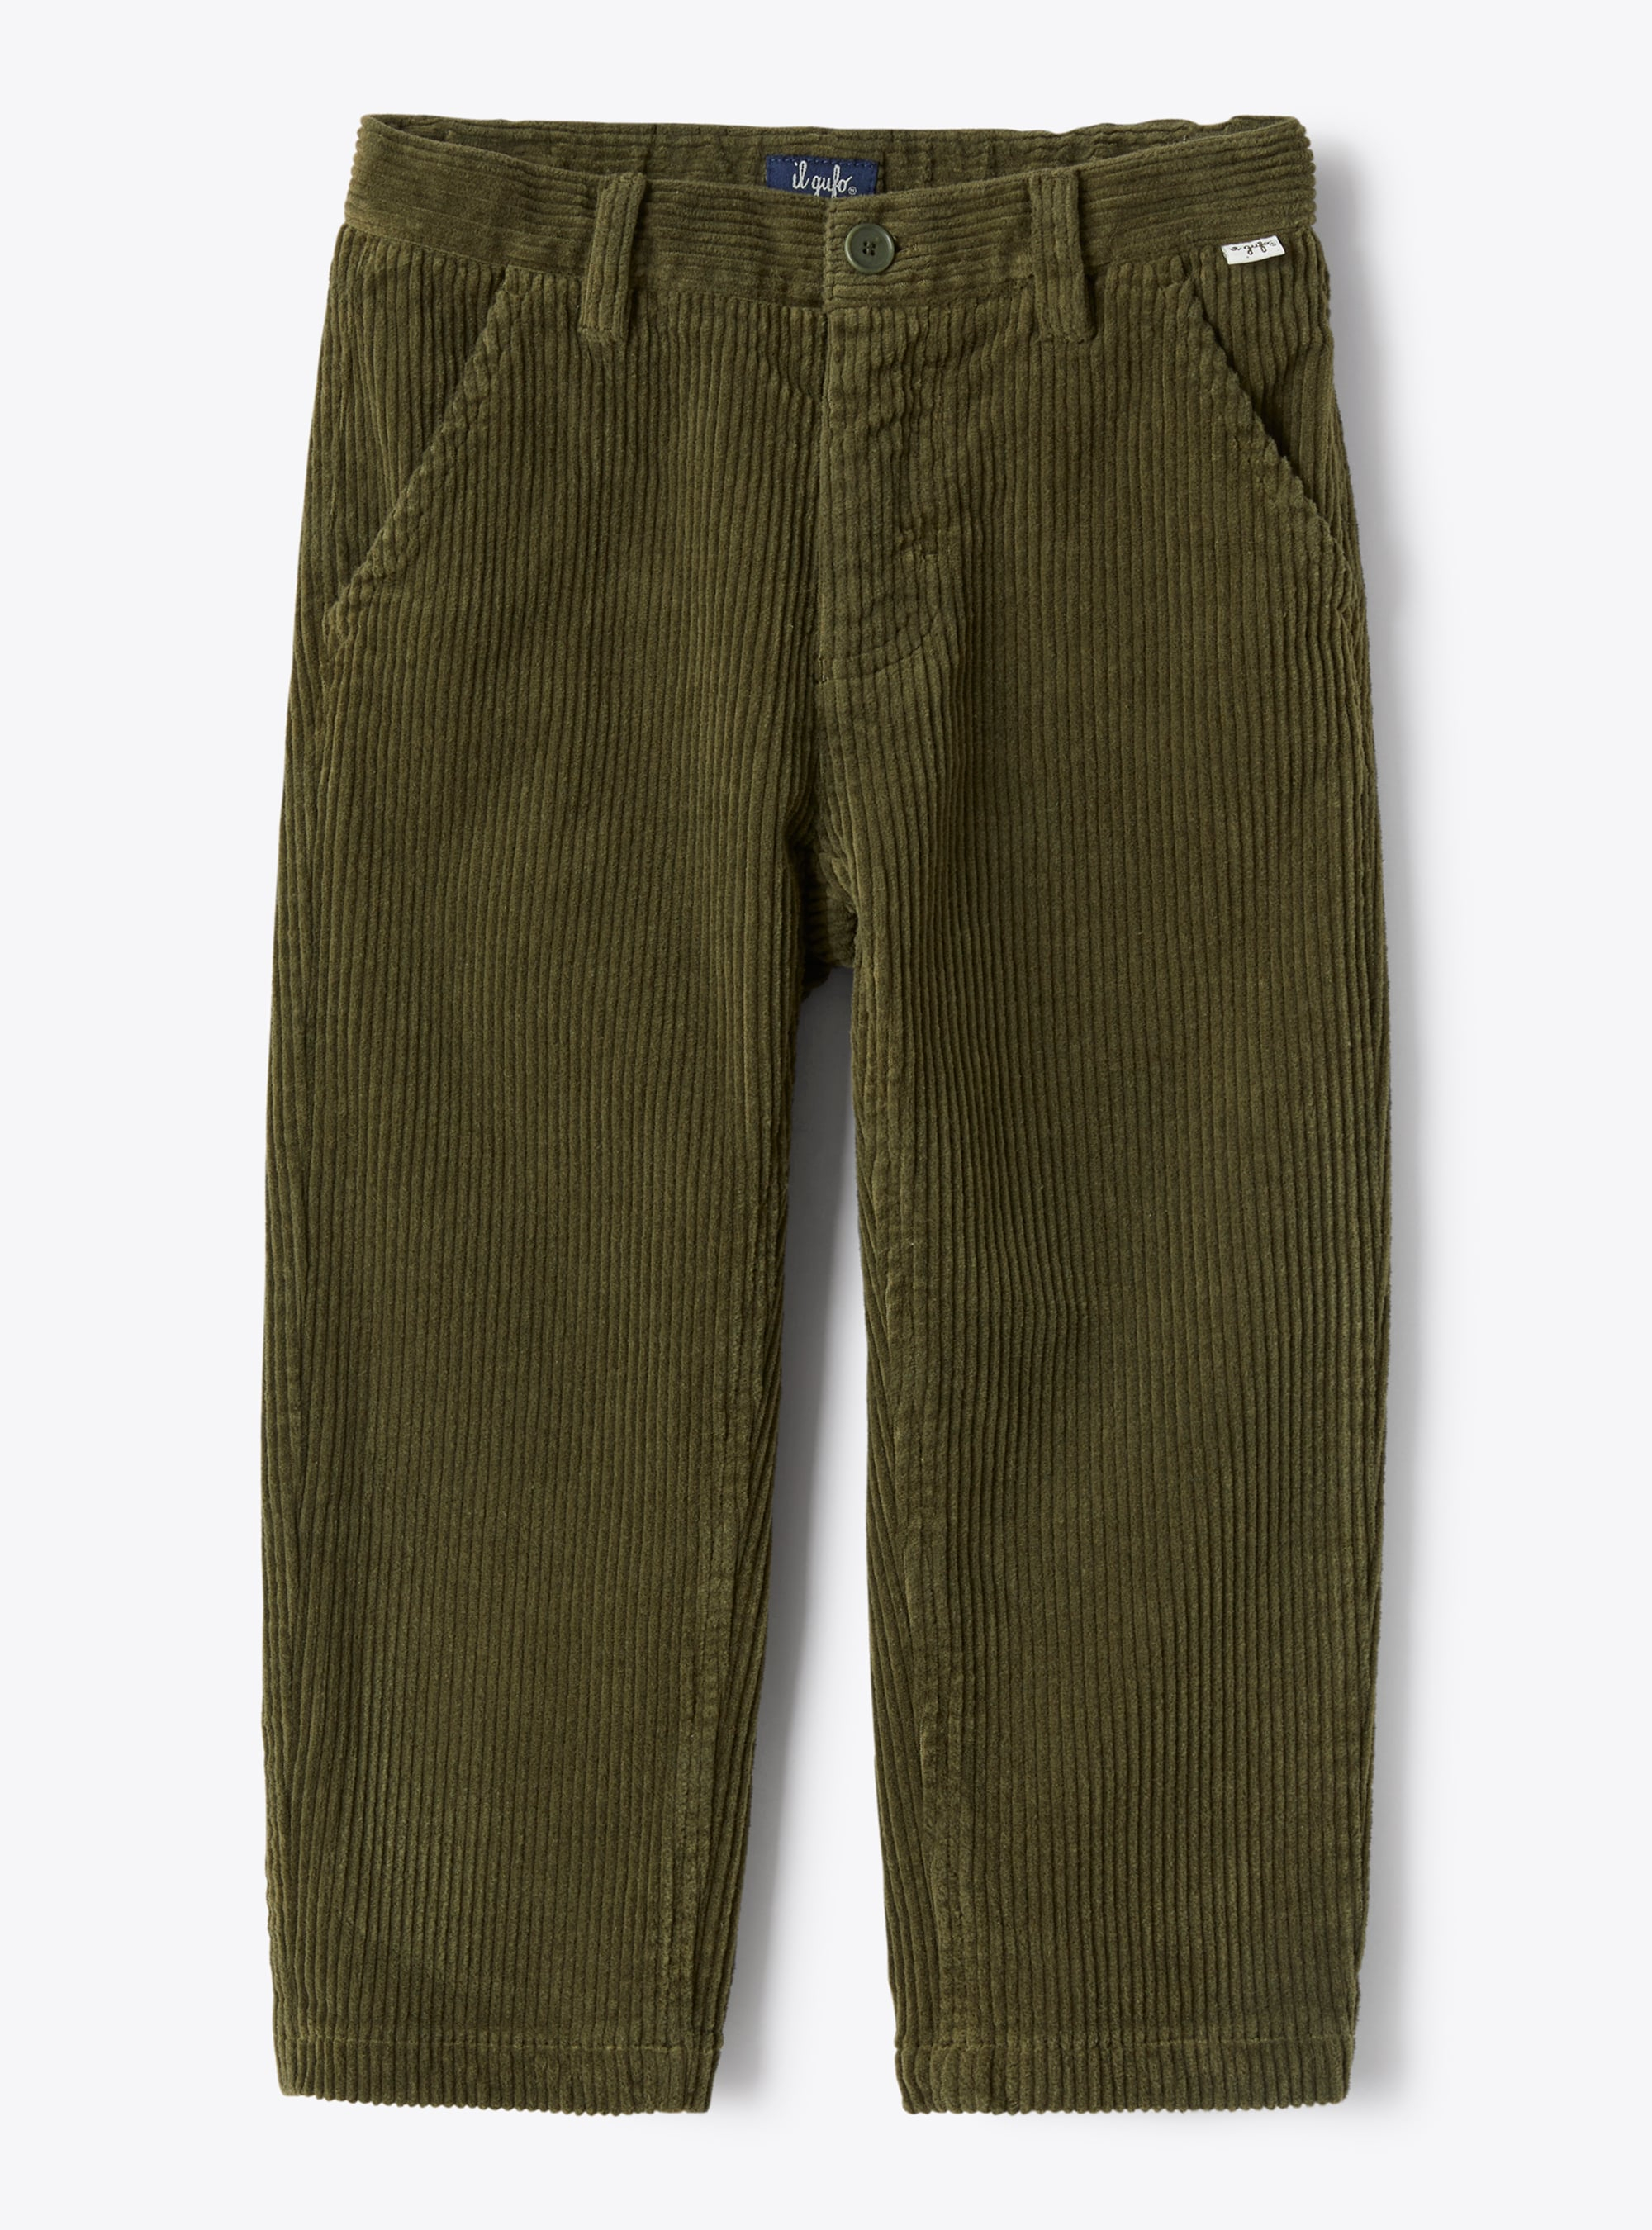 Olive green corduroy trousers - Trousers - Il Gufo